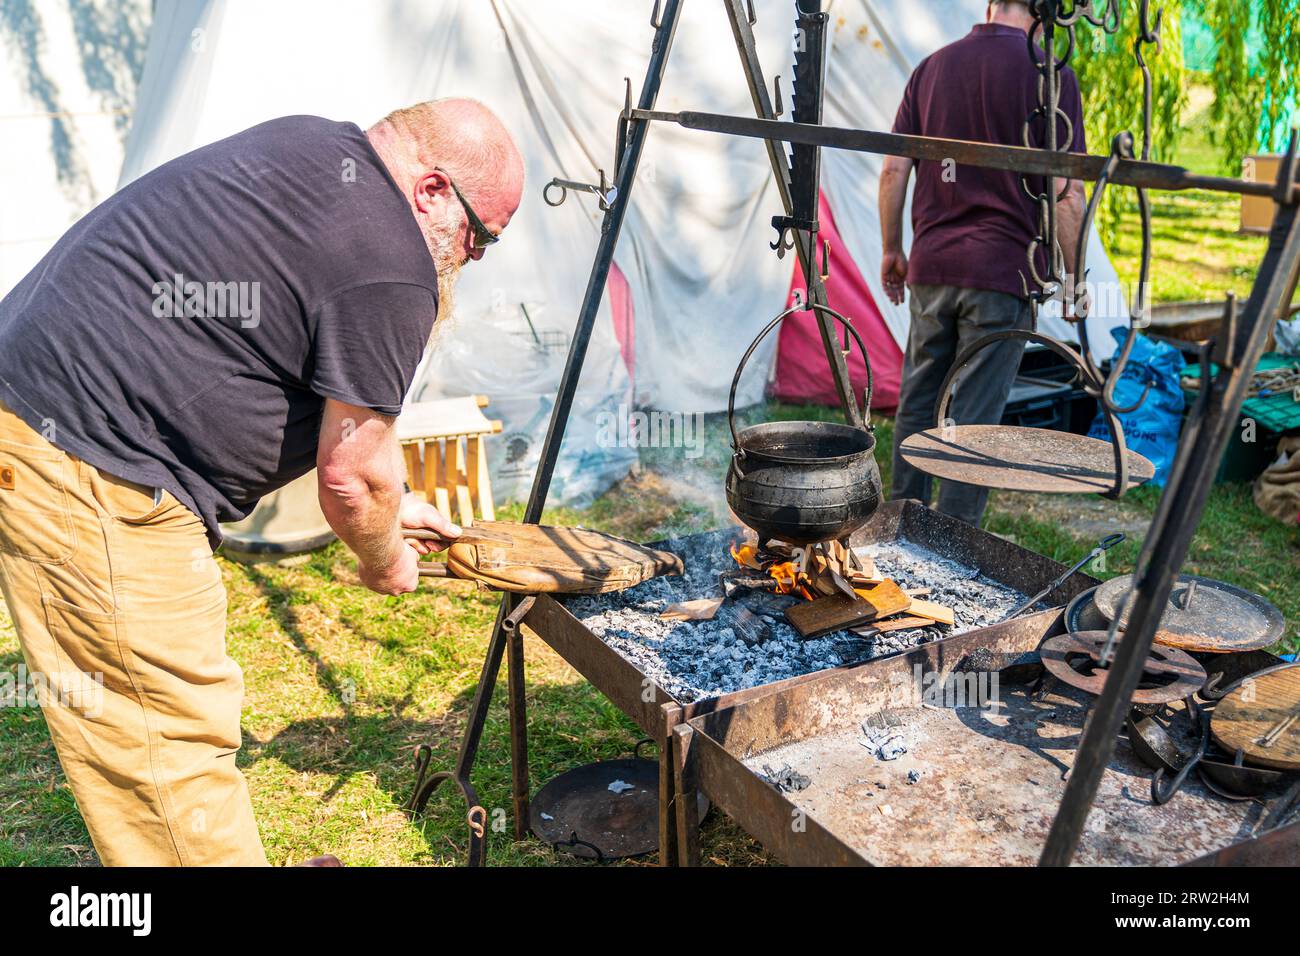 Middle aged man using medieval bellows on a small fire of chopped wood with a cauldron hanging over on a cast iron frame work. Stock Photo